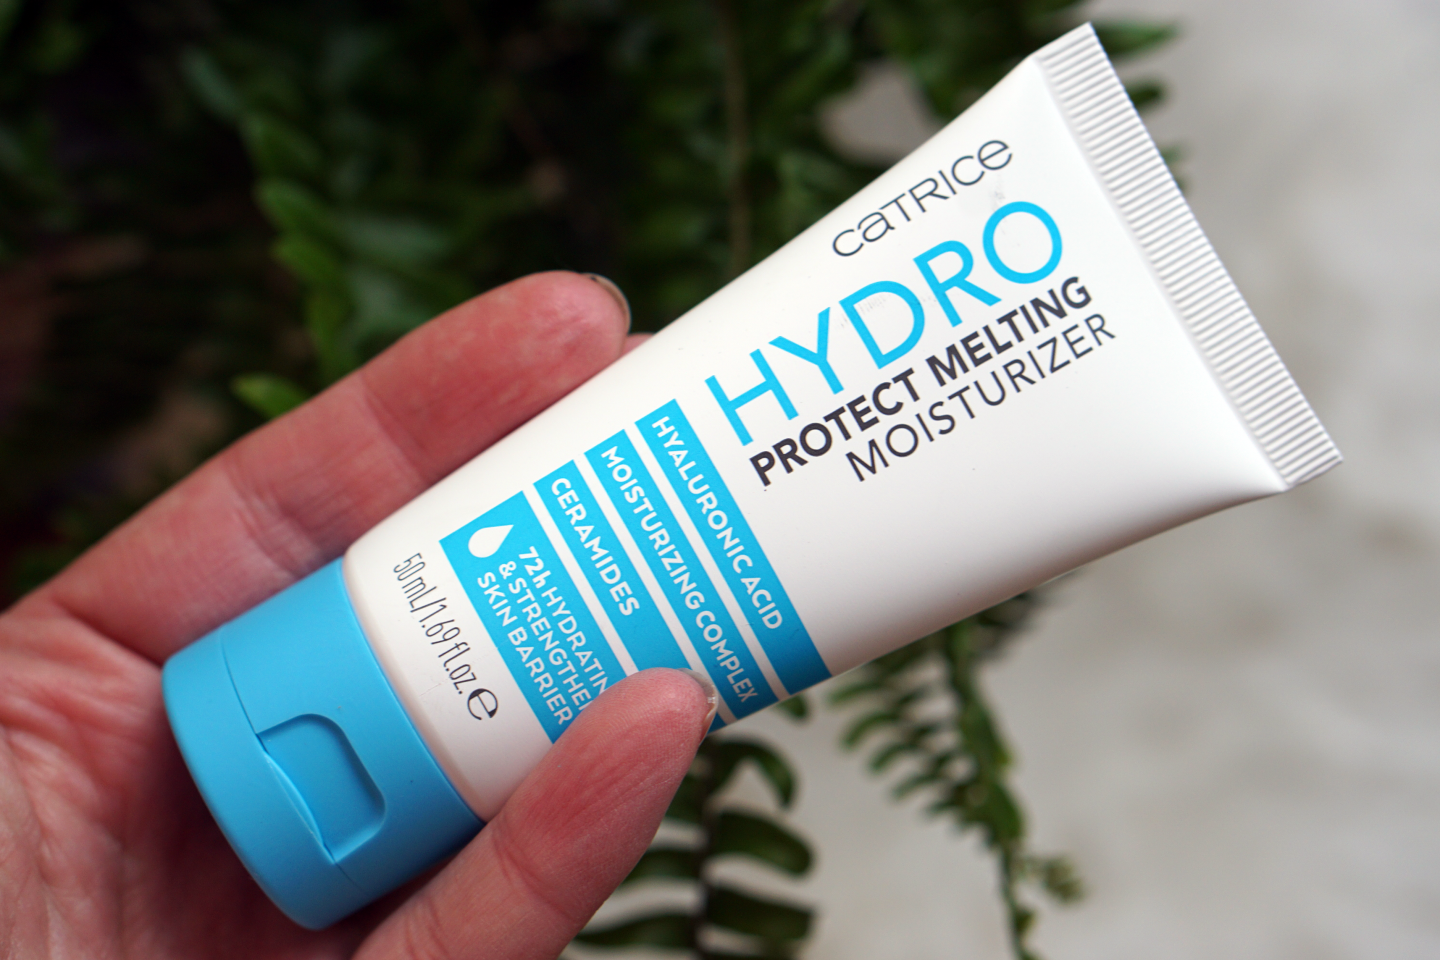 Protect review Hydro Moisturizer Catrice Melting